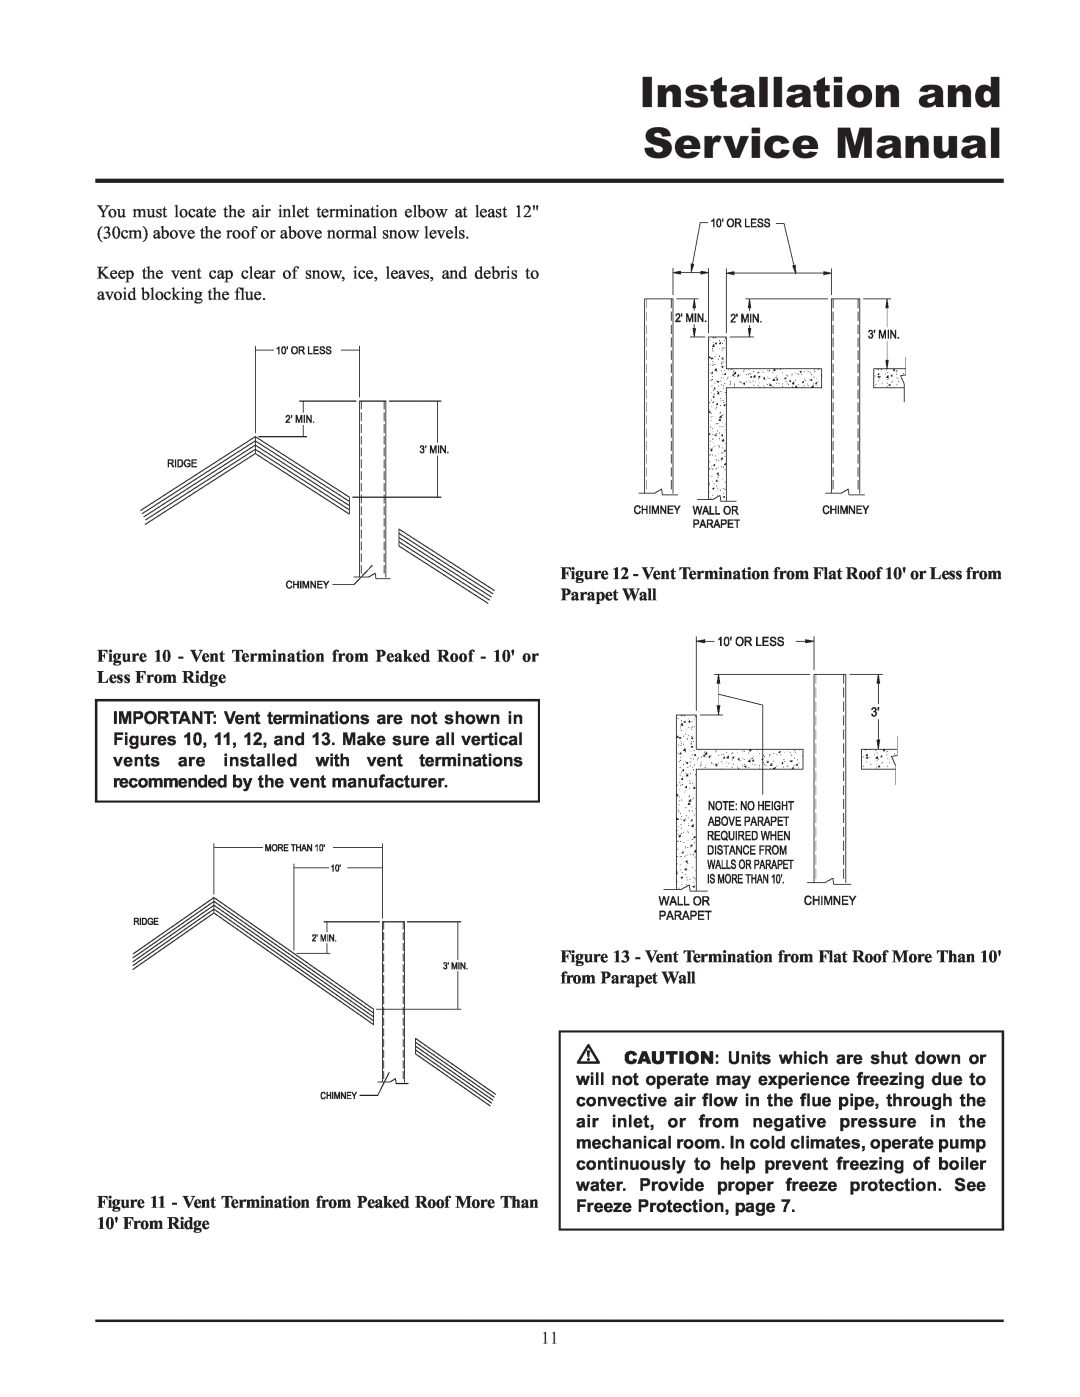 Lochinvar 000 - 2, 495, 065 service manual TABLE-A Flue Pipe Sizes, Parapet Wall 